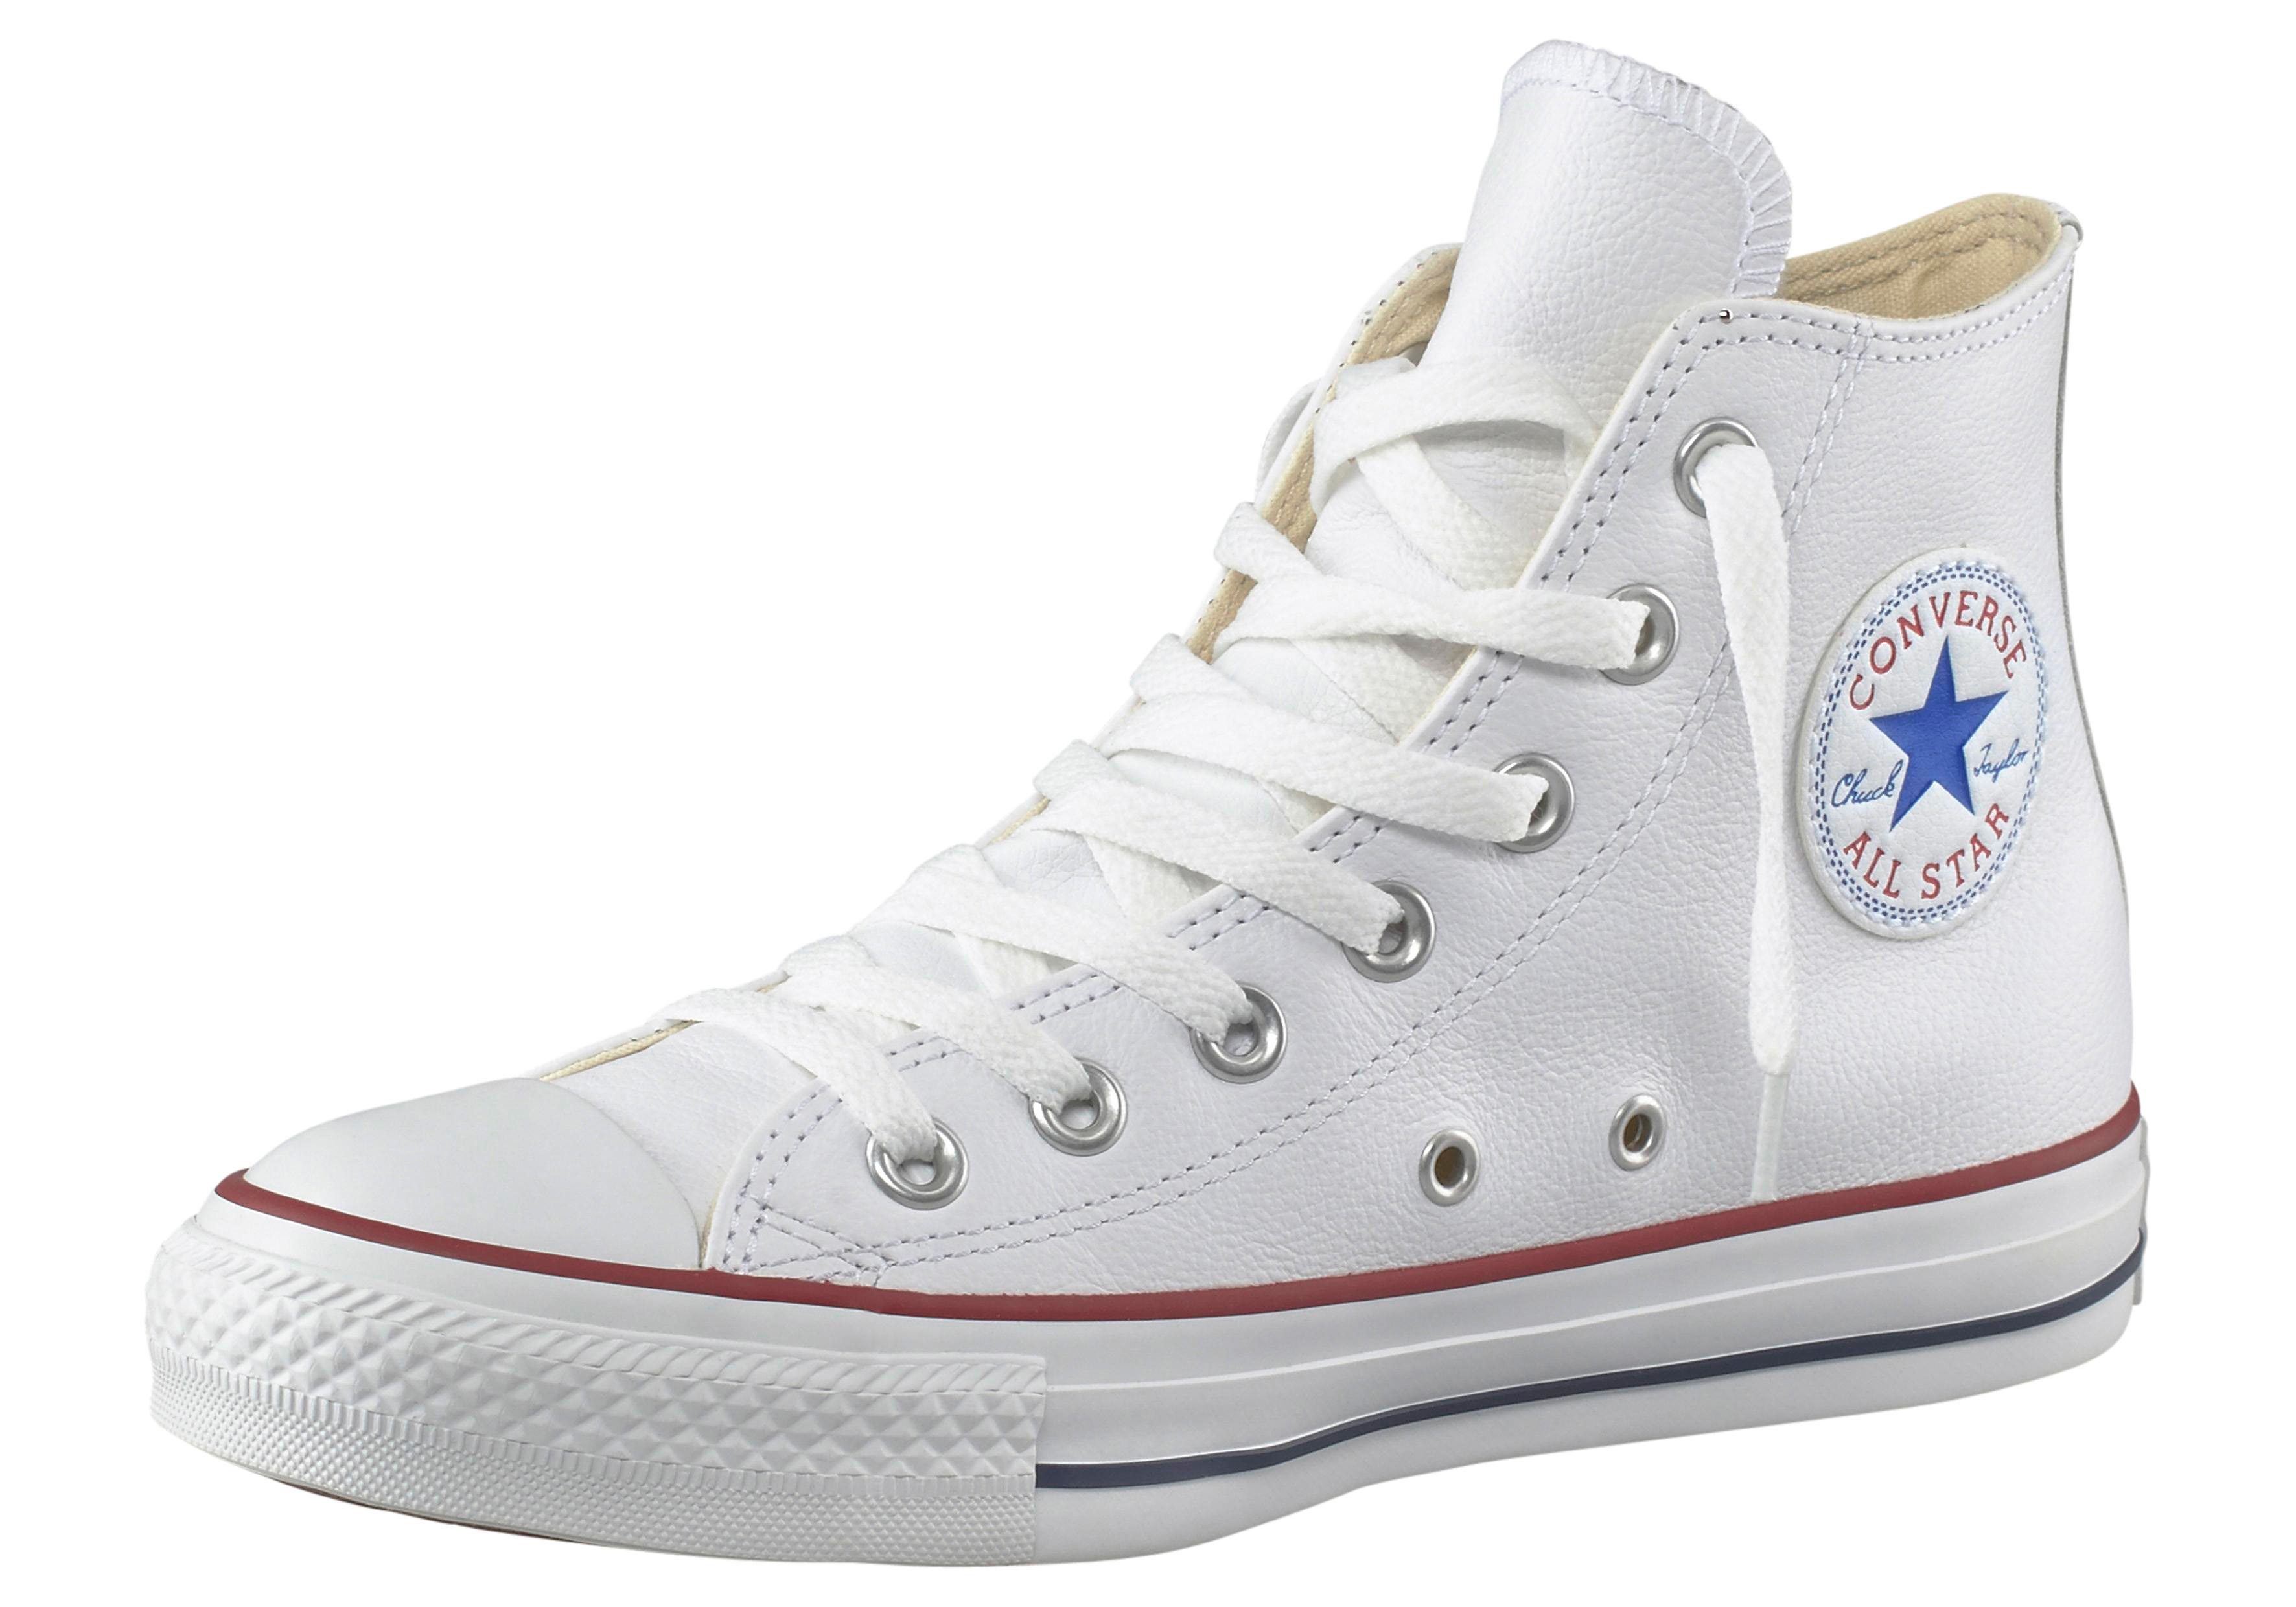 CONVERSE Sneakers All Star Basic Leather